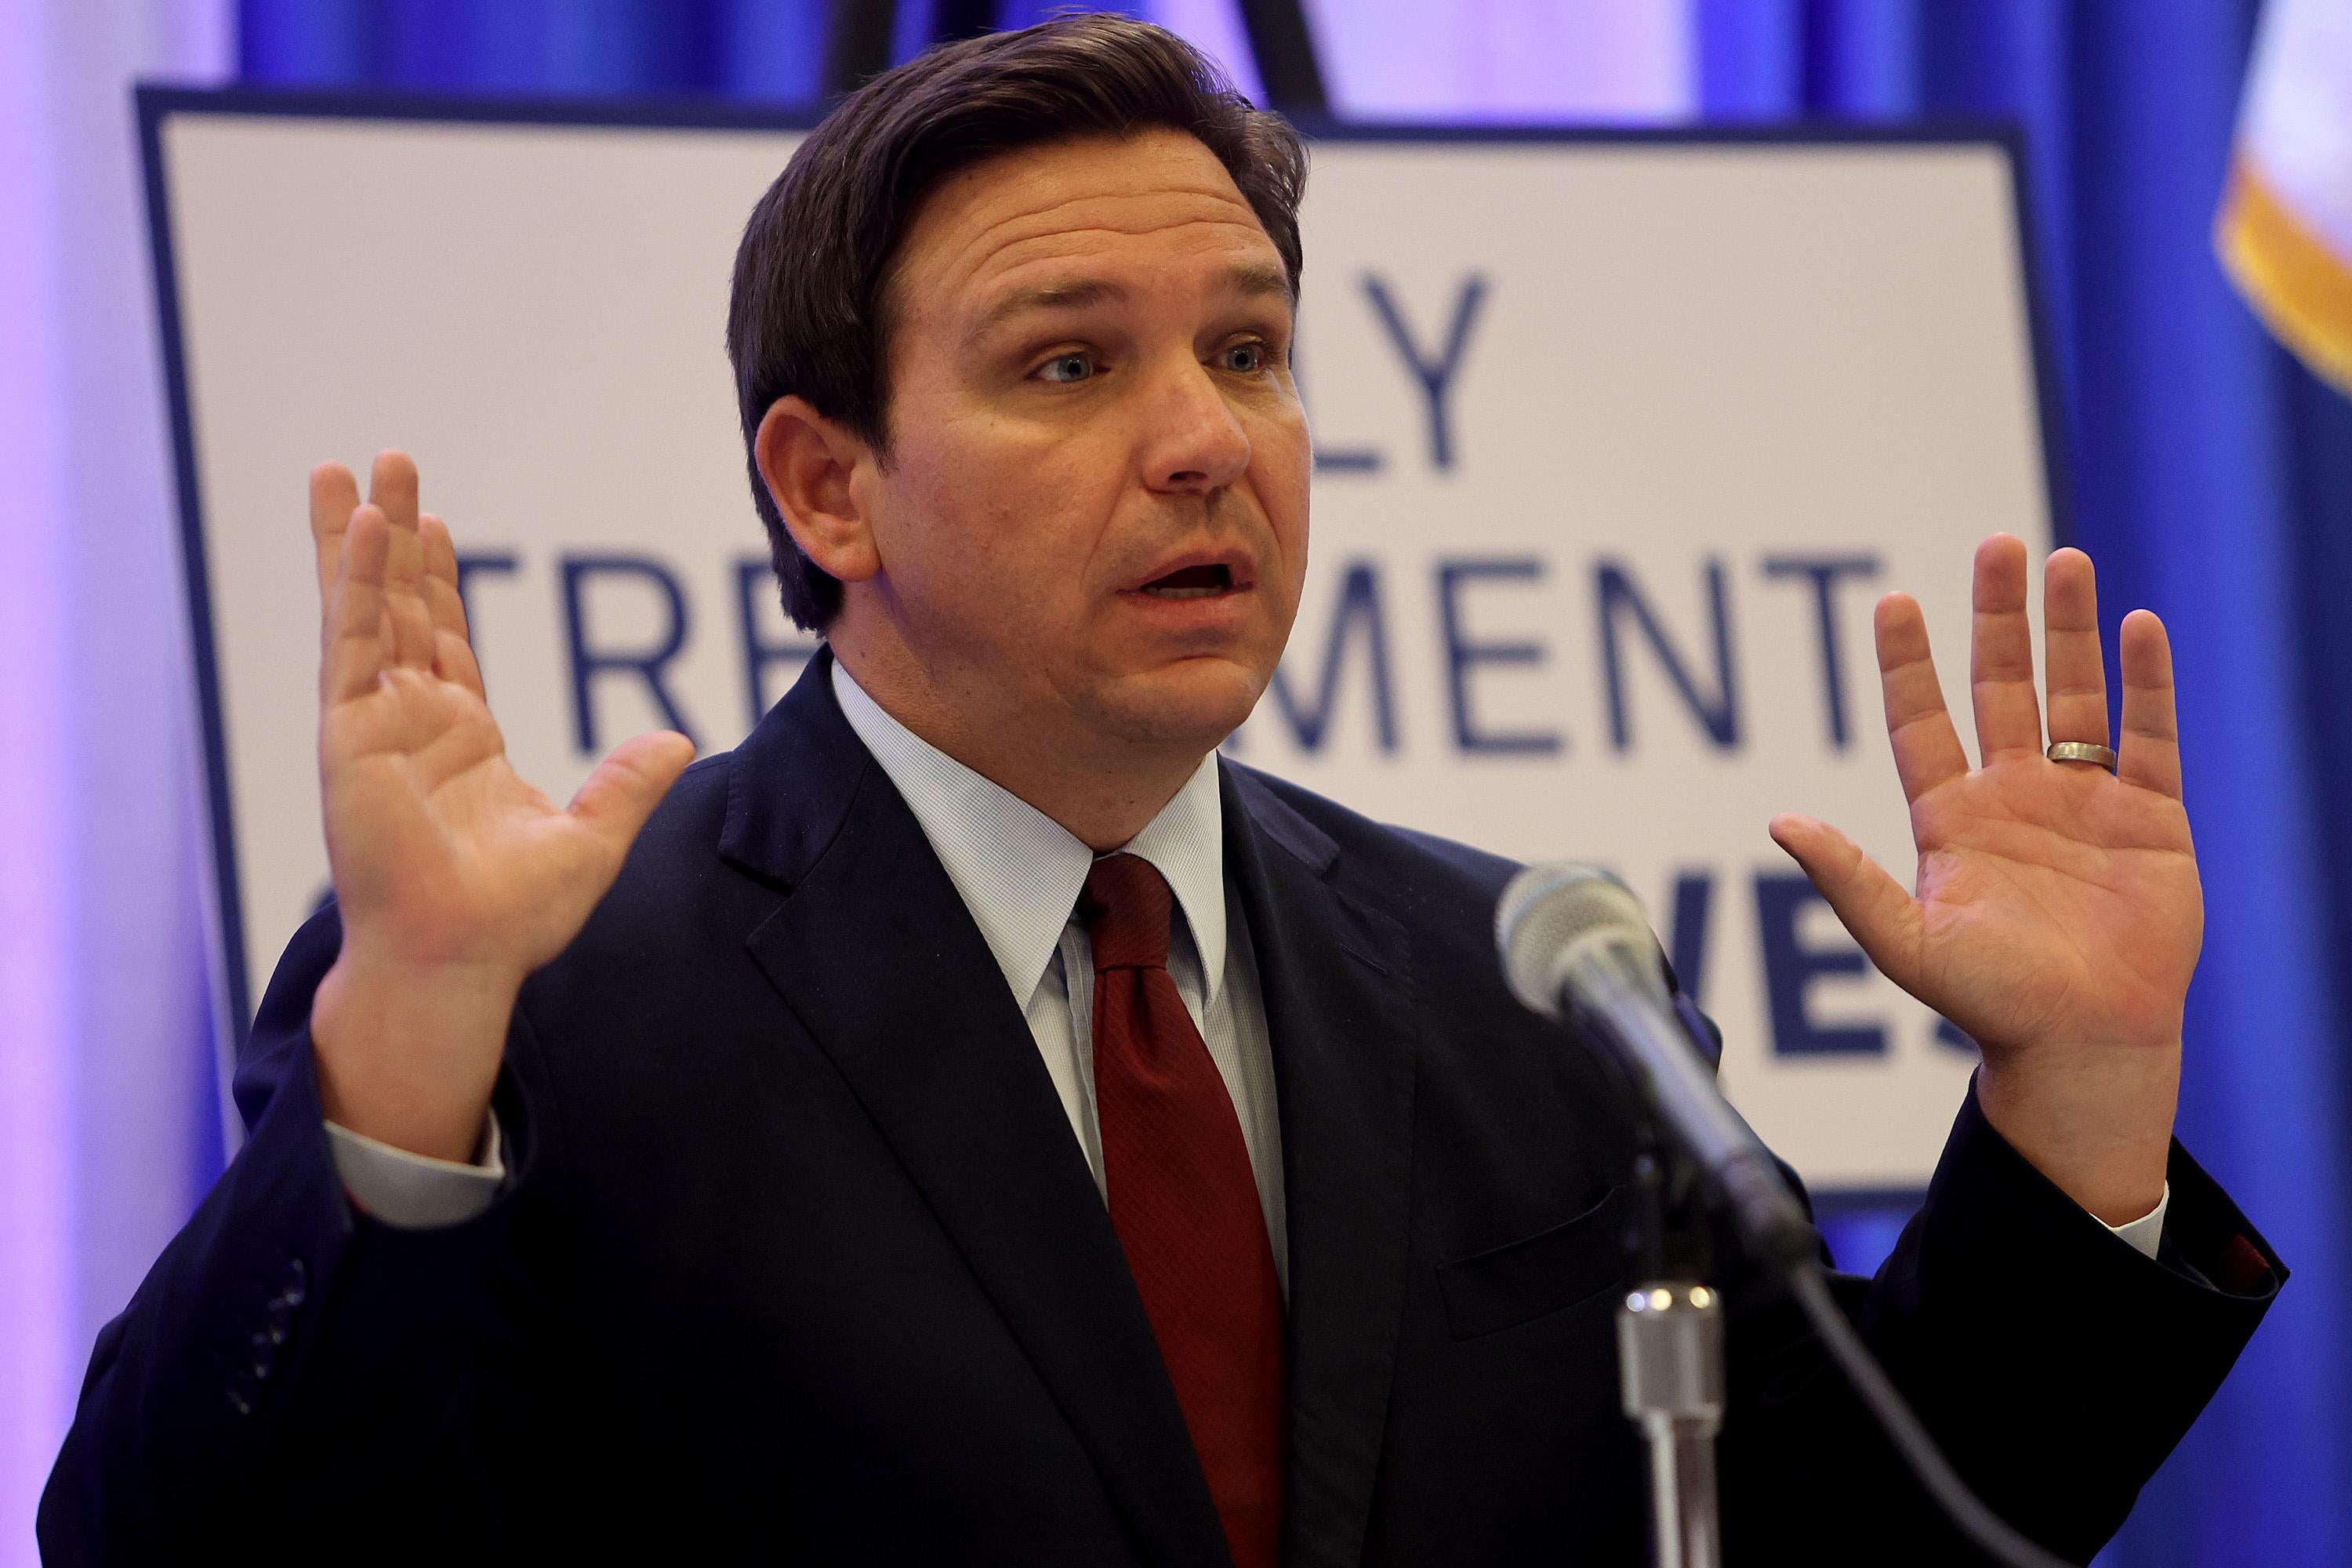 Ron DeSantis raises his hands while speaking in a mic in front of a sign.